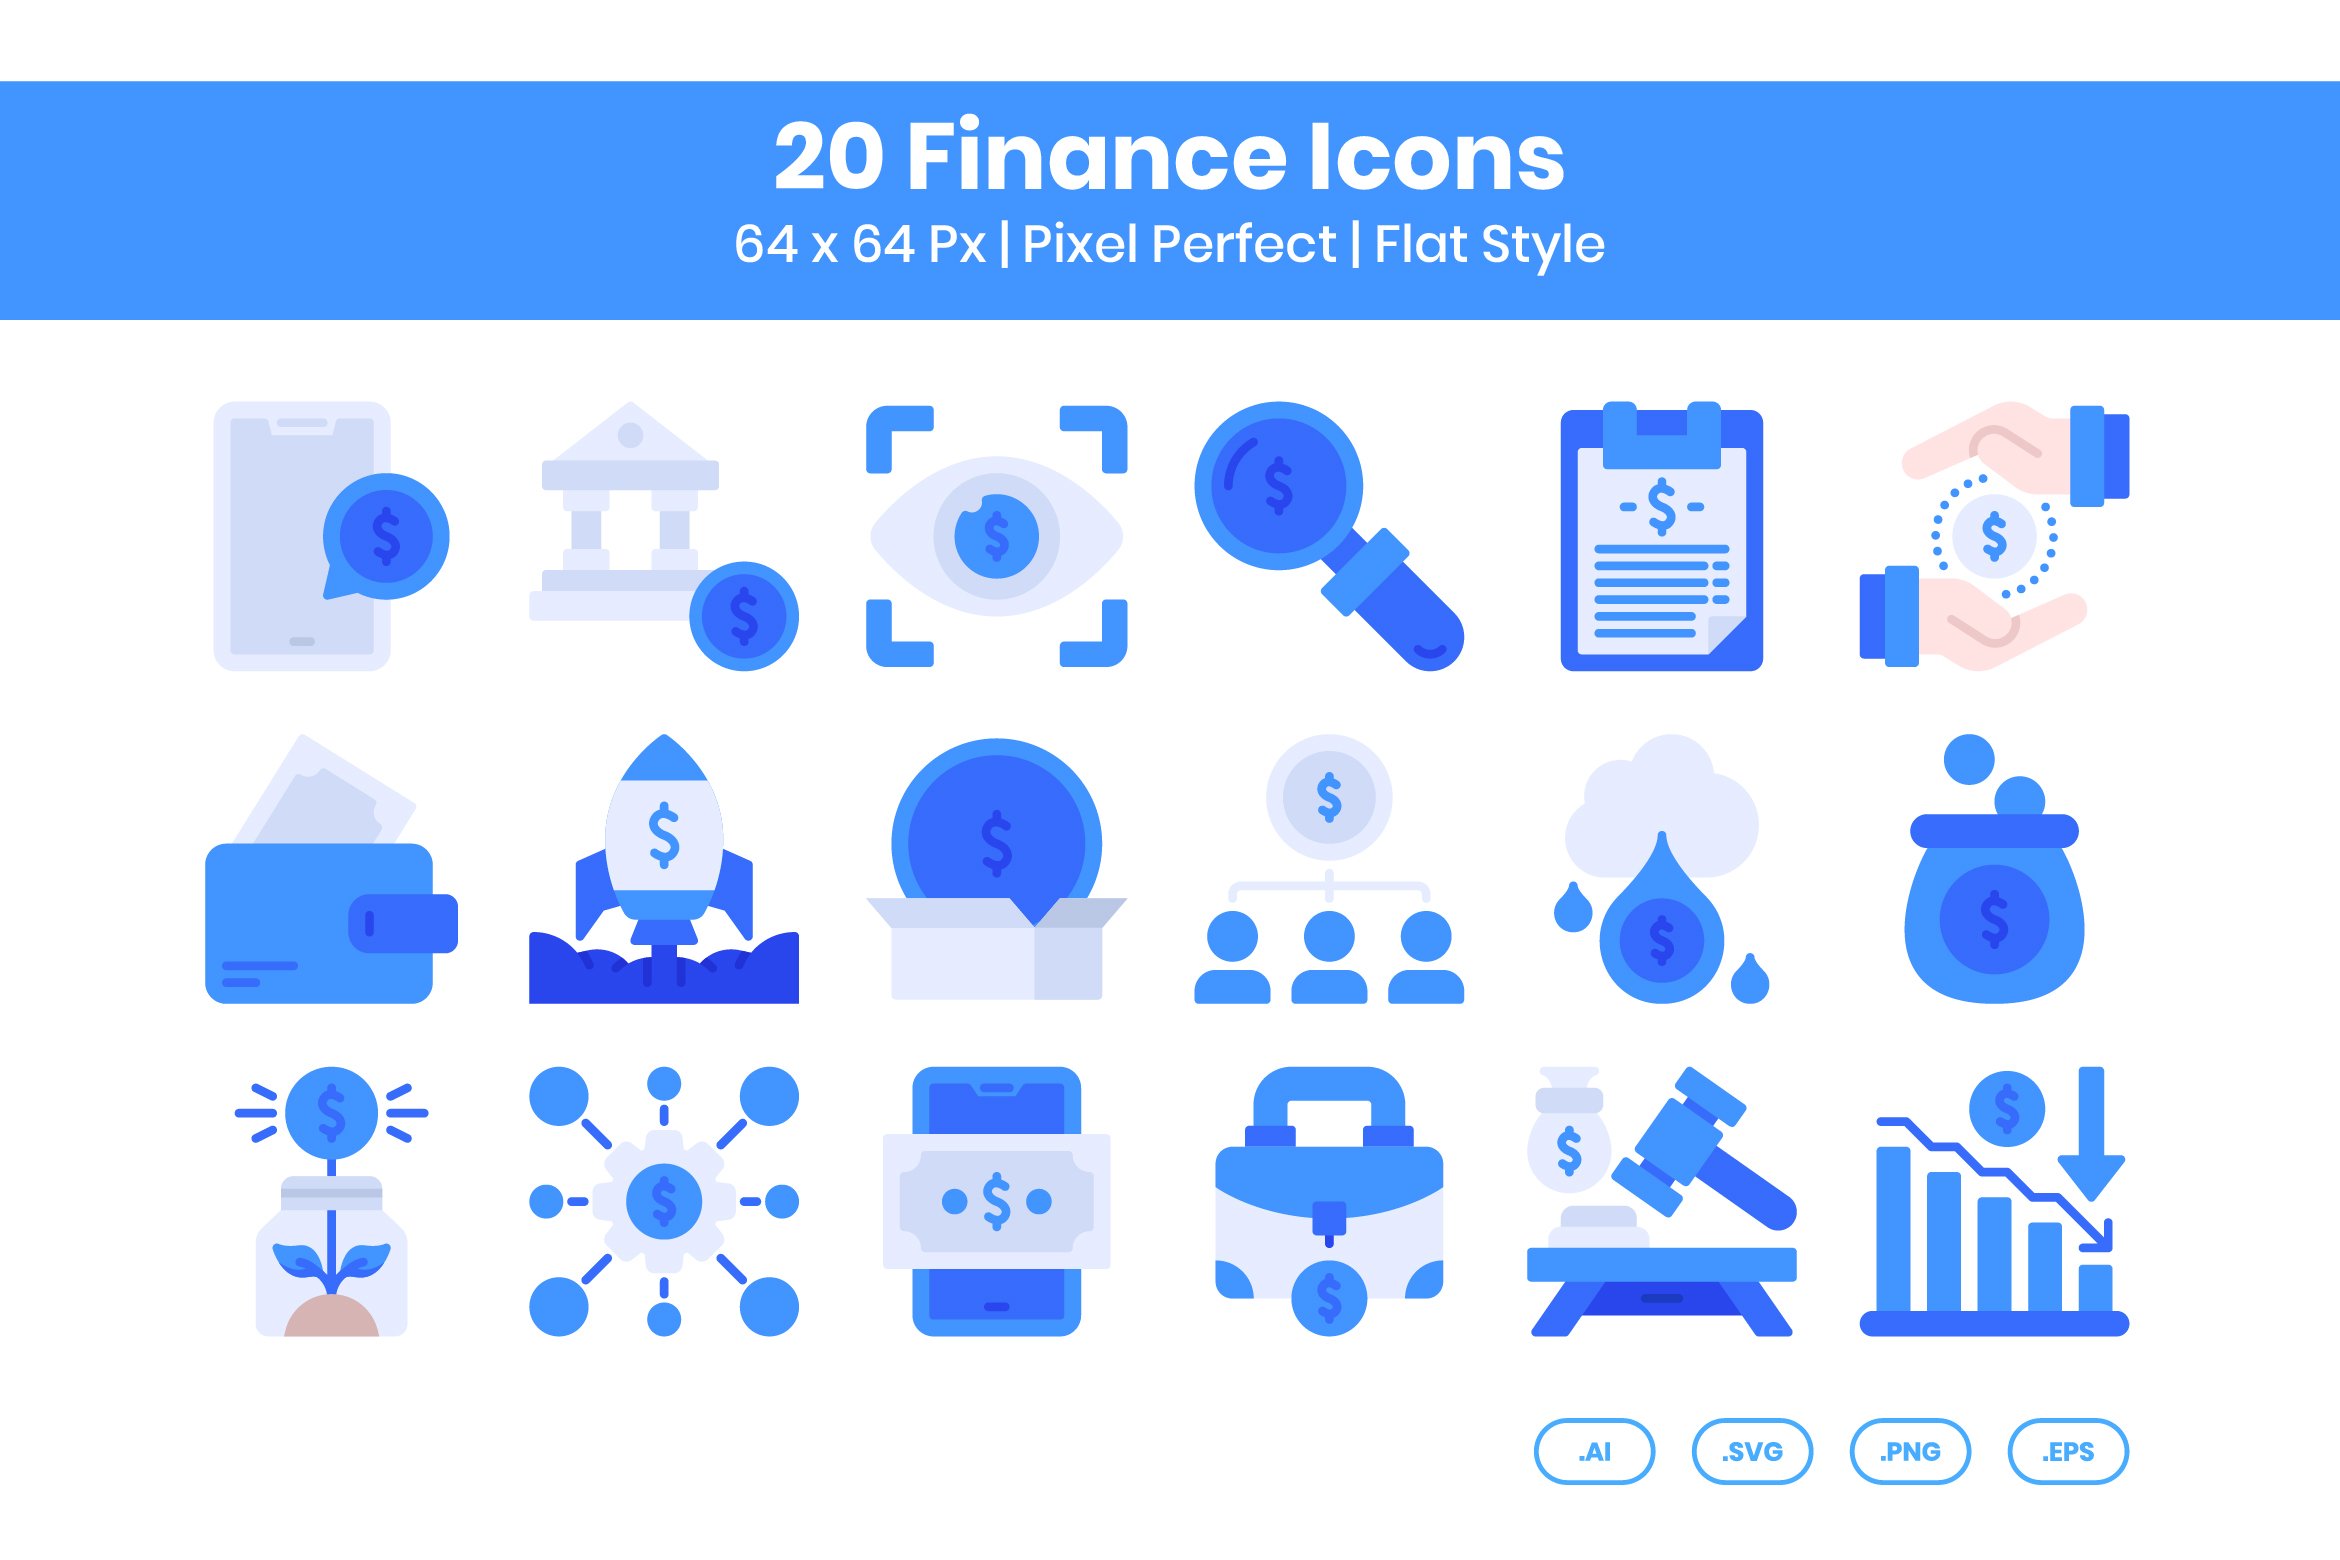 20 Finance - Flat cover image.